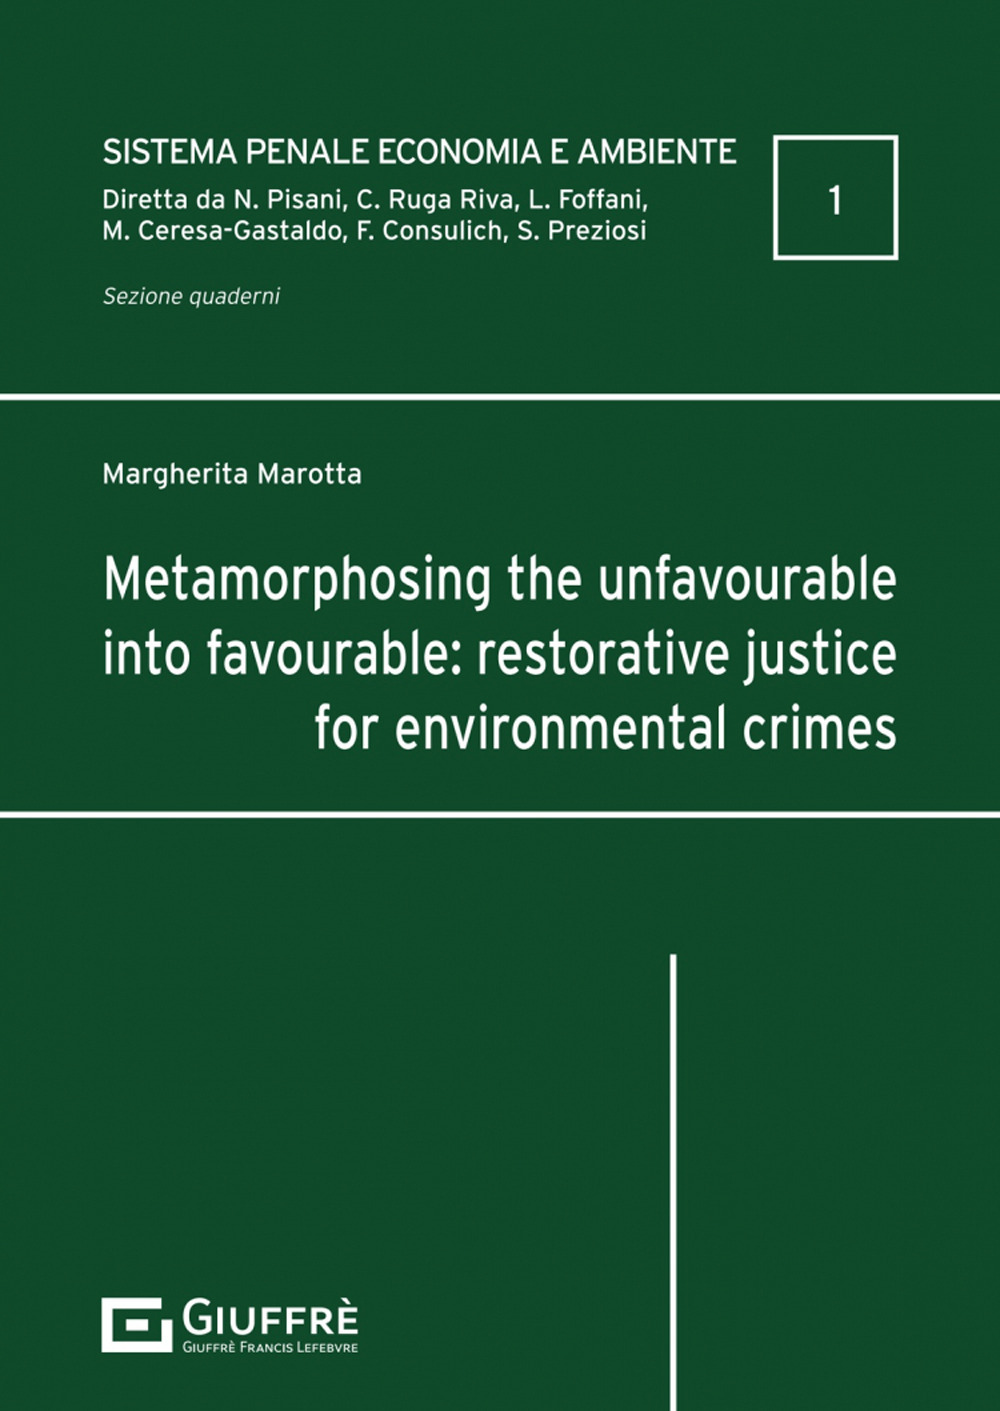 Metamorphosing the unfavourable into favourable: restorative justice for environmental crimes